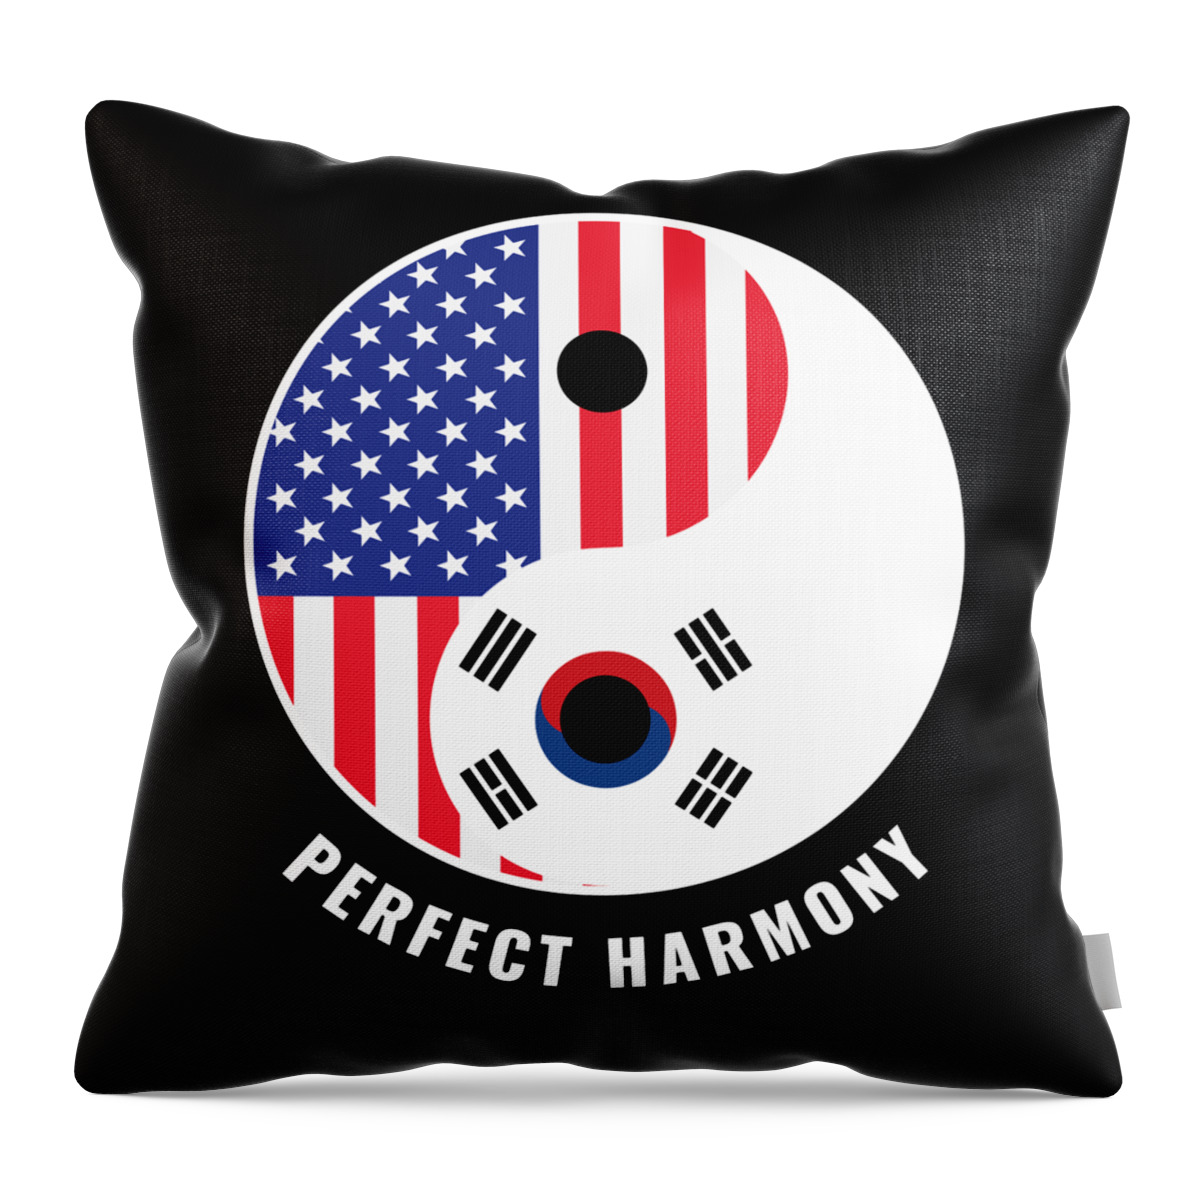 Korean American Throw Pillow featuring the digital art USA South Korea Ying Yang Heritage for Proud Korean American Biracial American Roots Culture Descendents by Martin Hicks